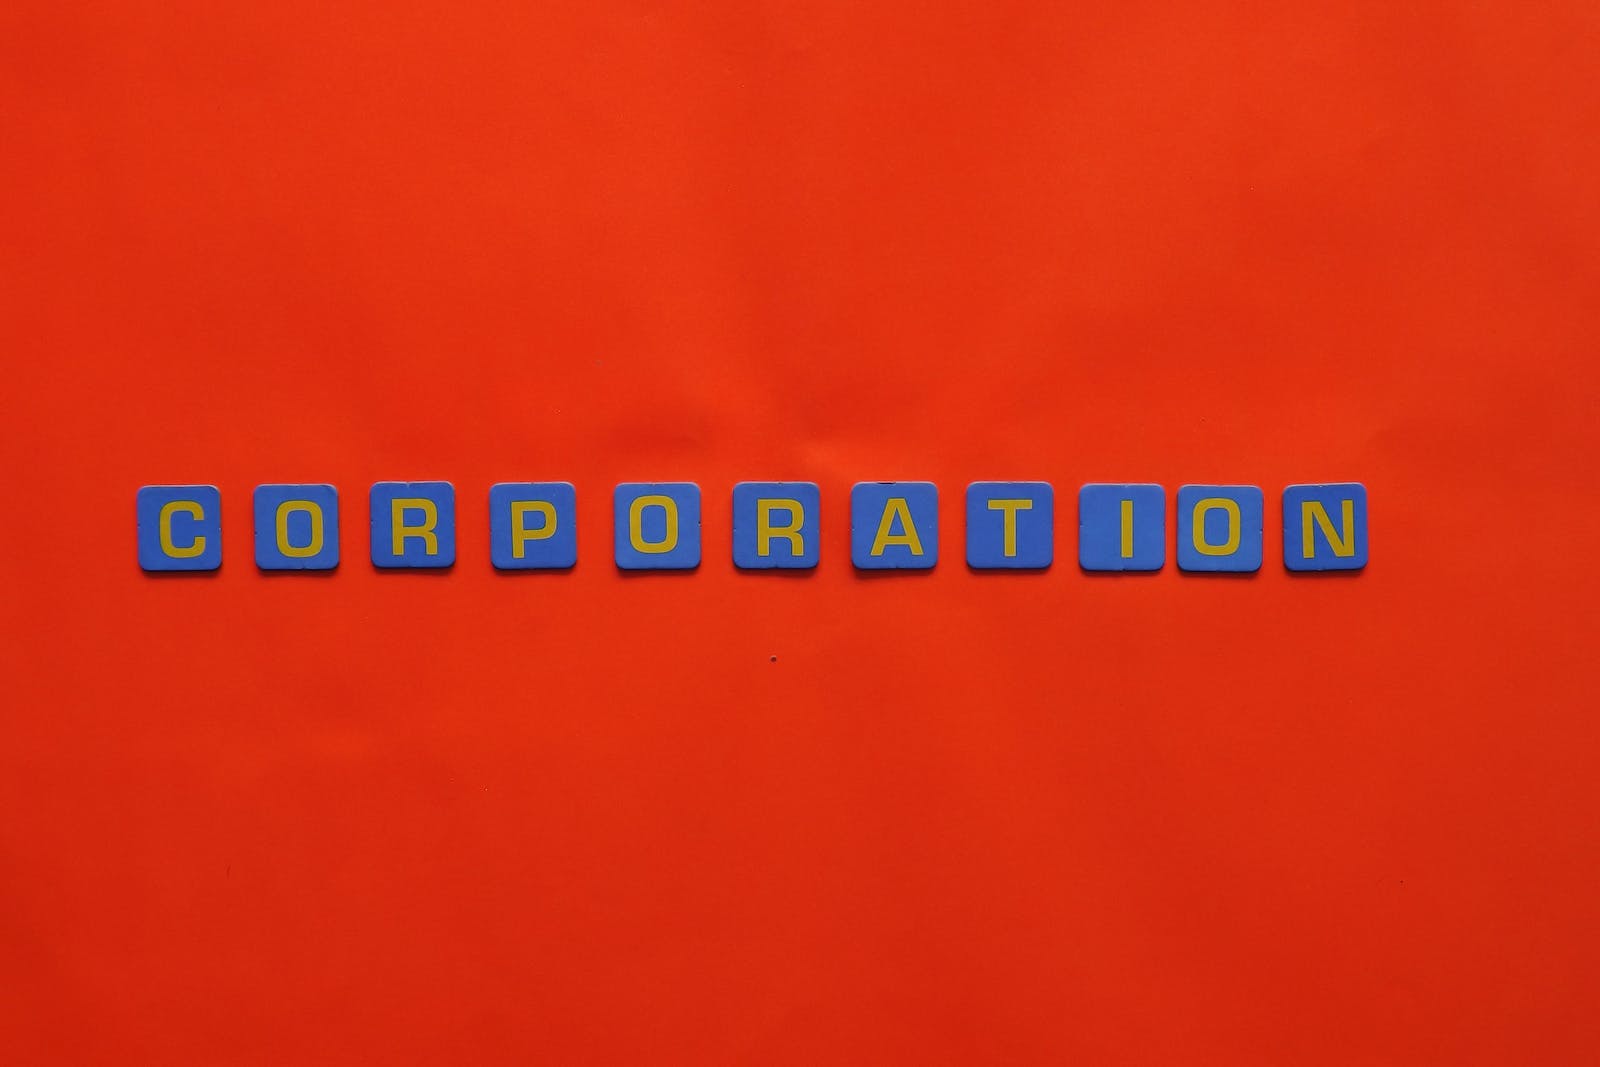 The Word Corporation with a Red Background